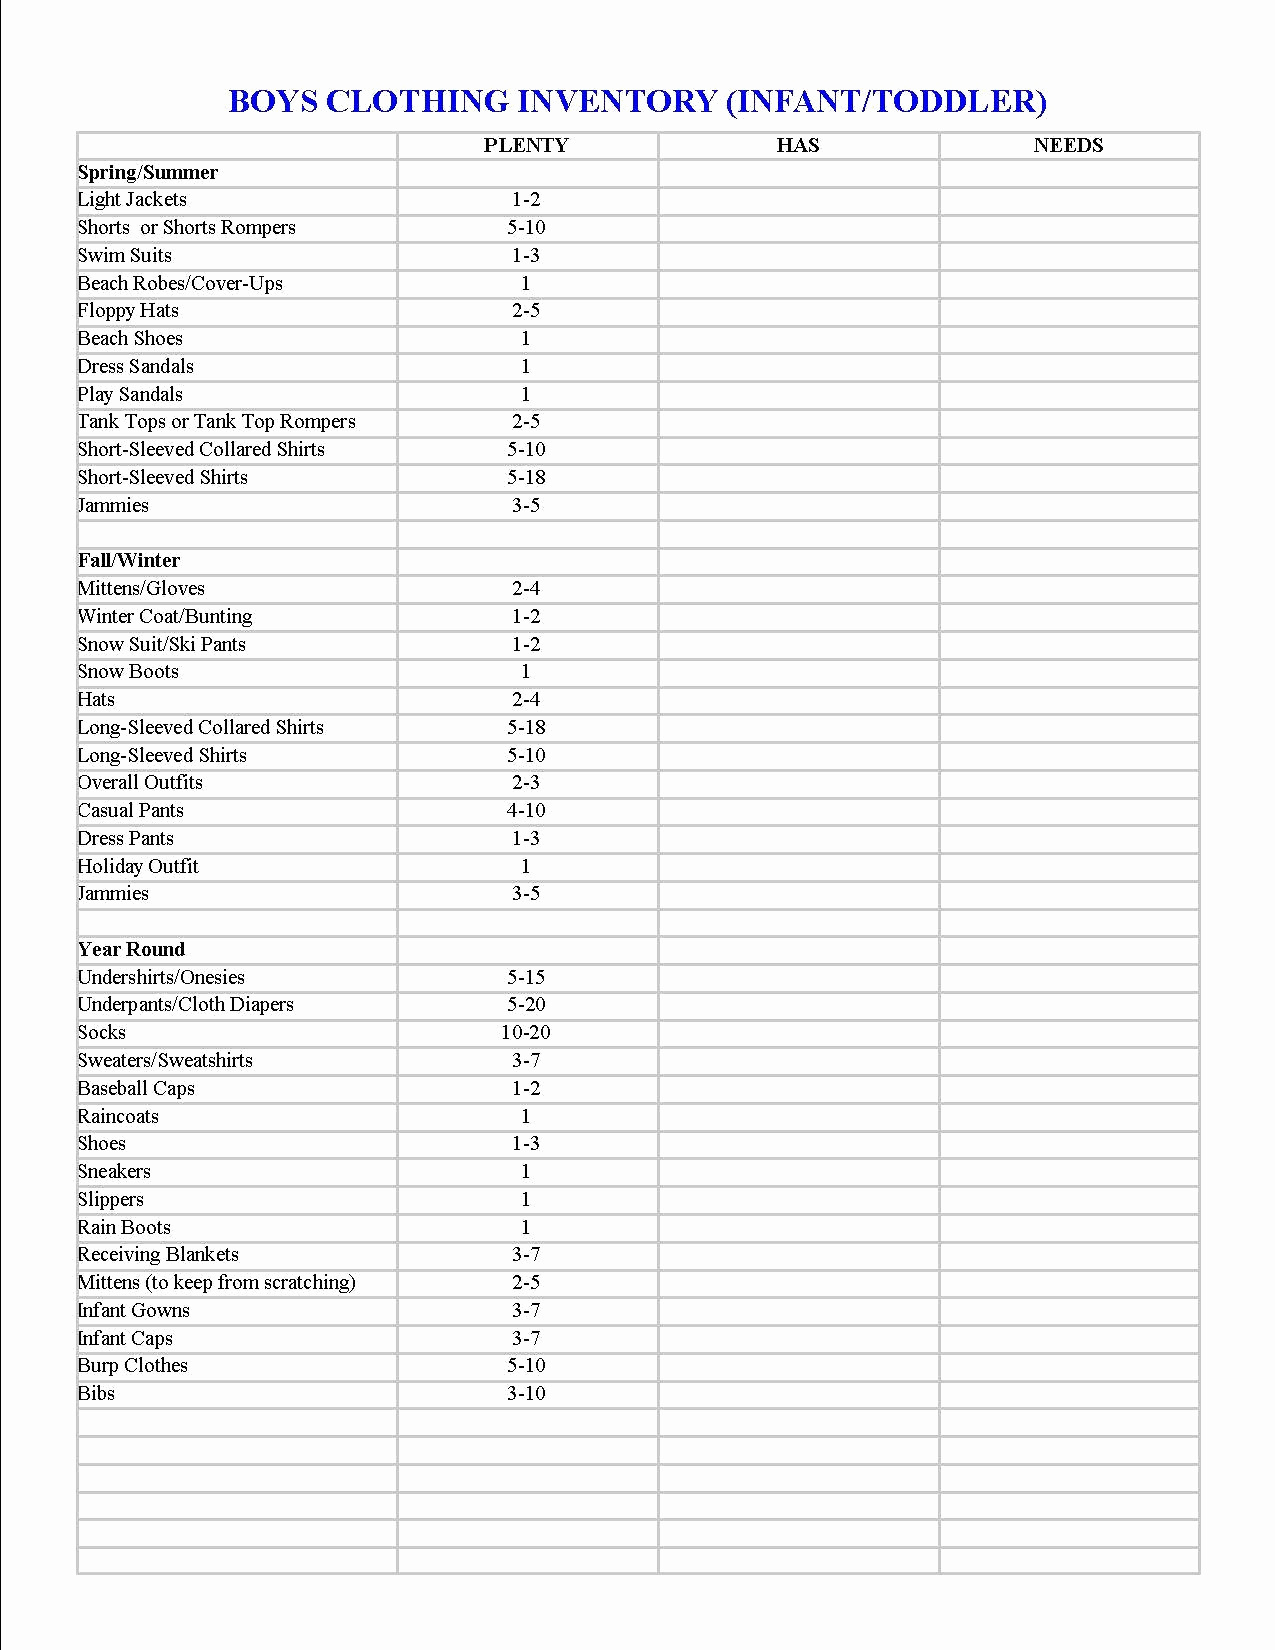 Salvation Army Donation Value Guide 2018 Spreadsheet Throughout Salvation Army Donation Value Guide 2016 Spreadsheet – Spreadsheet